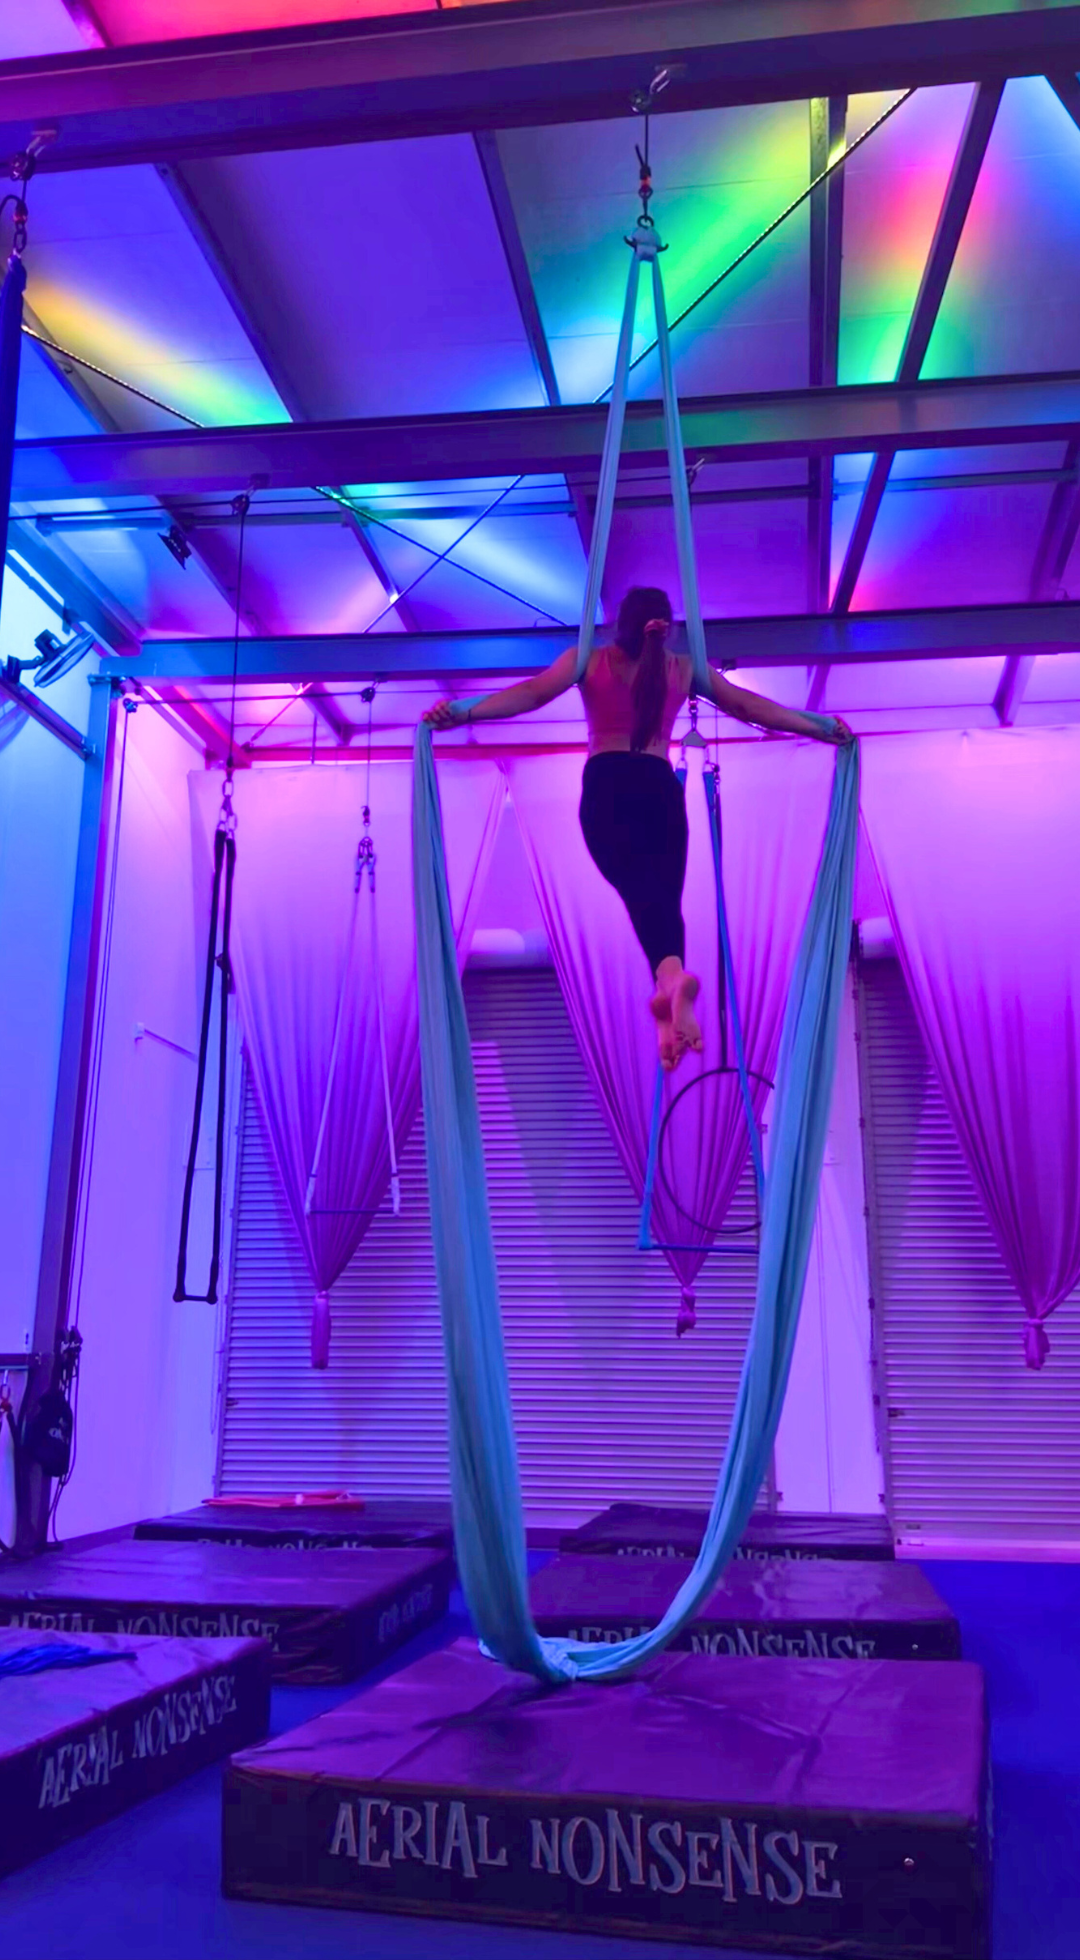 Join us in Maroochydore for aerial silks, all ages and levels. Discover the joy of defying limits, mastering new skills, and unleashing your inner acrobat.